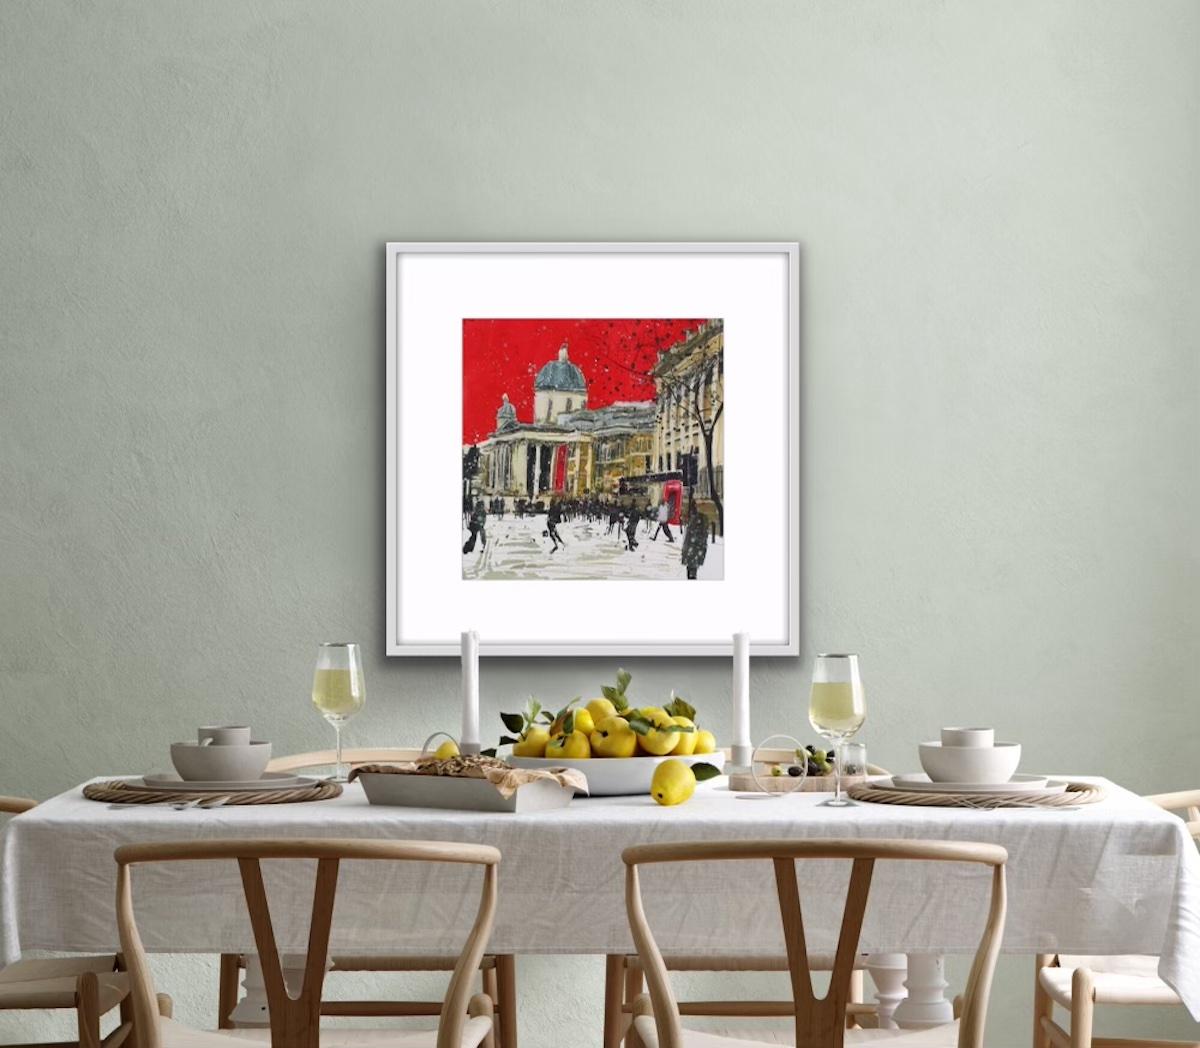 Gallery on the Square London by Susan Brown [2021]
limited_edition and hand signed by the artist 

Giclee print on paper

Edition number 150

Image size: H:40 cm x W:40 cm

Complete Size of Unframed Work: H:50 cm x W:50 cm x D:0.1cm

Sold